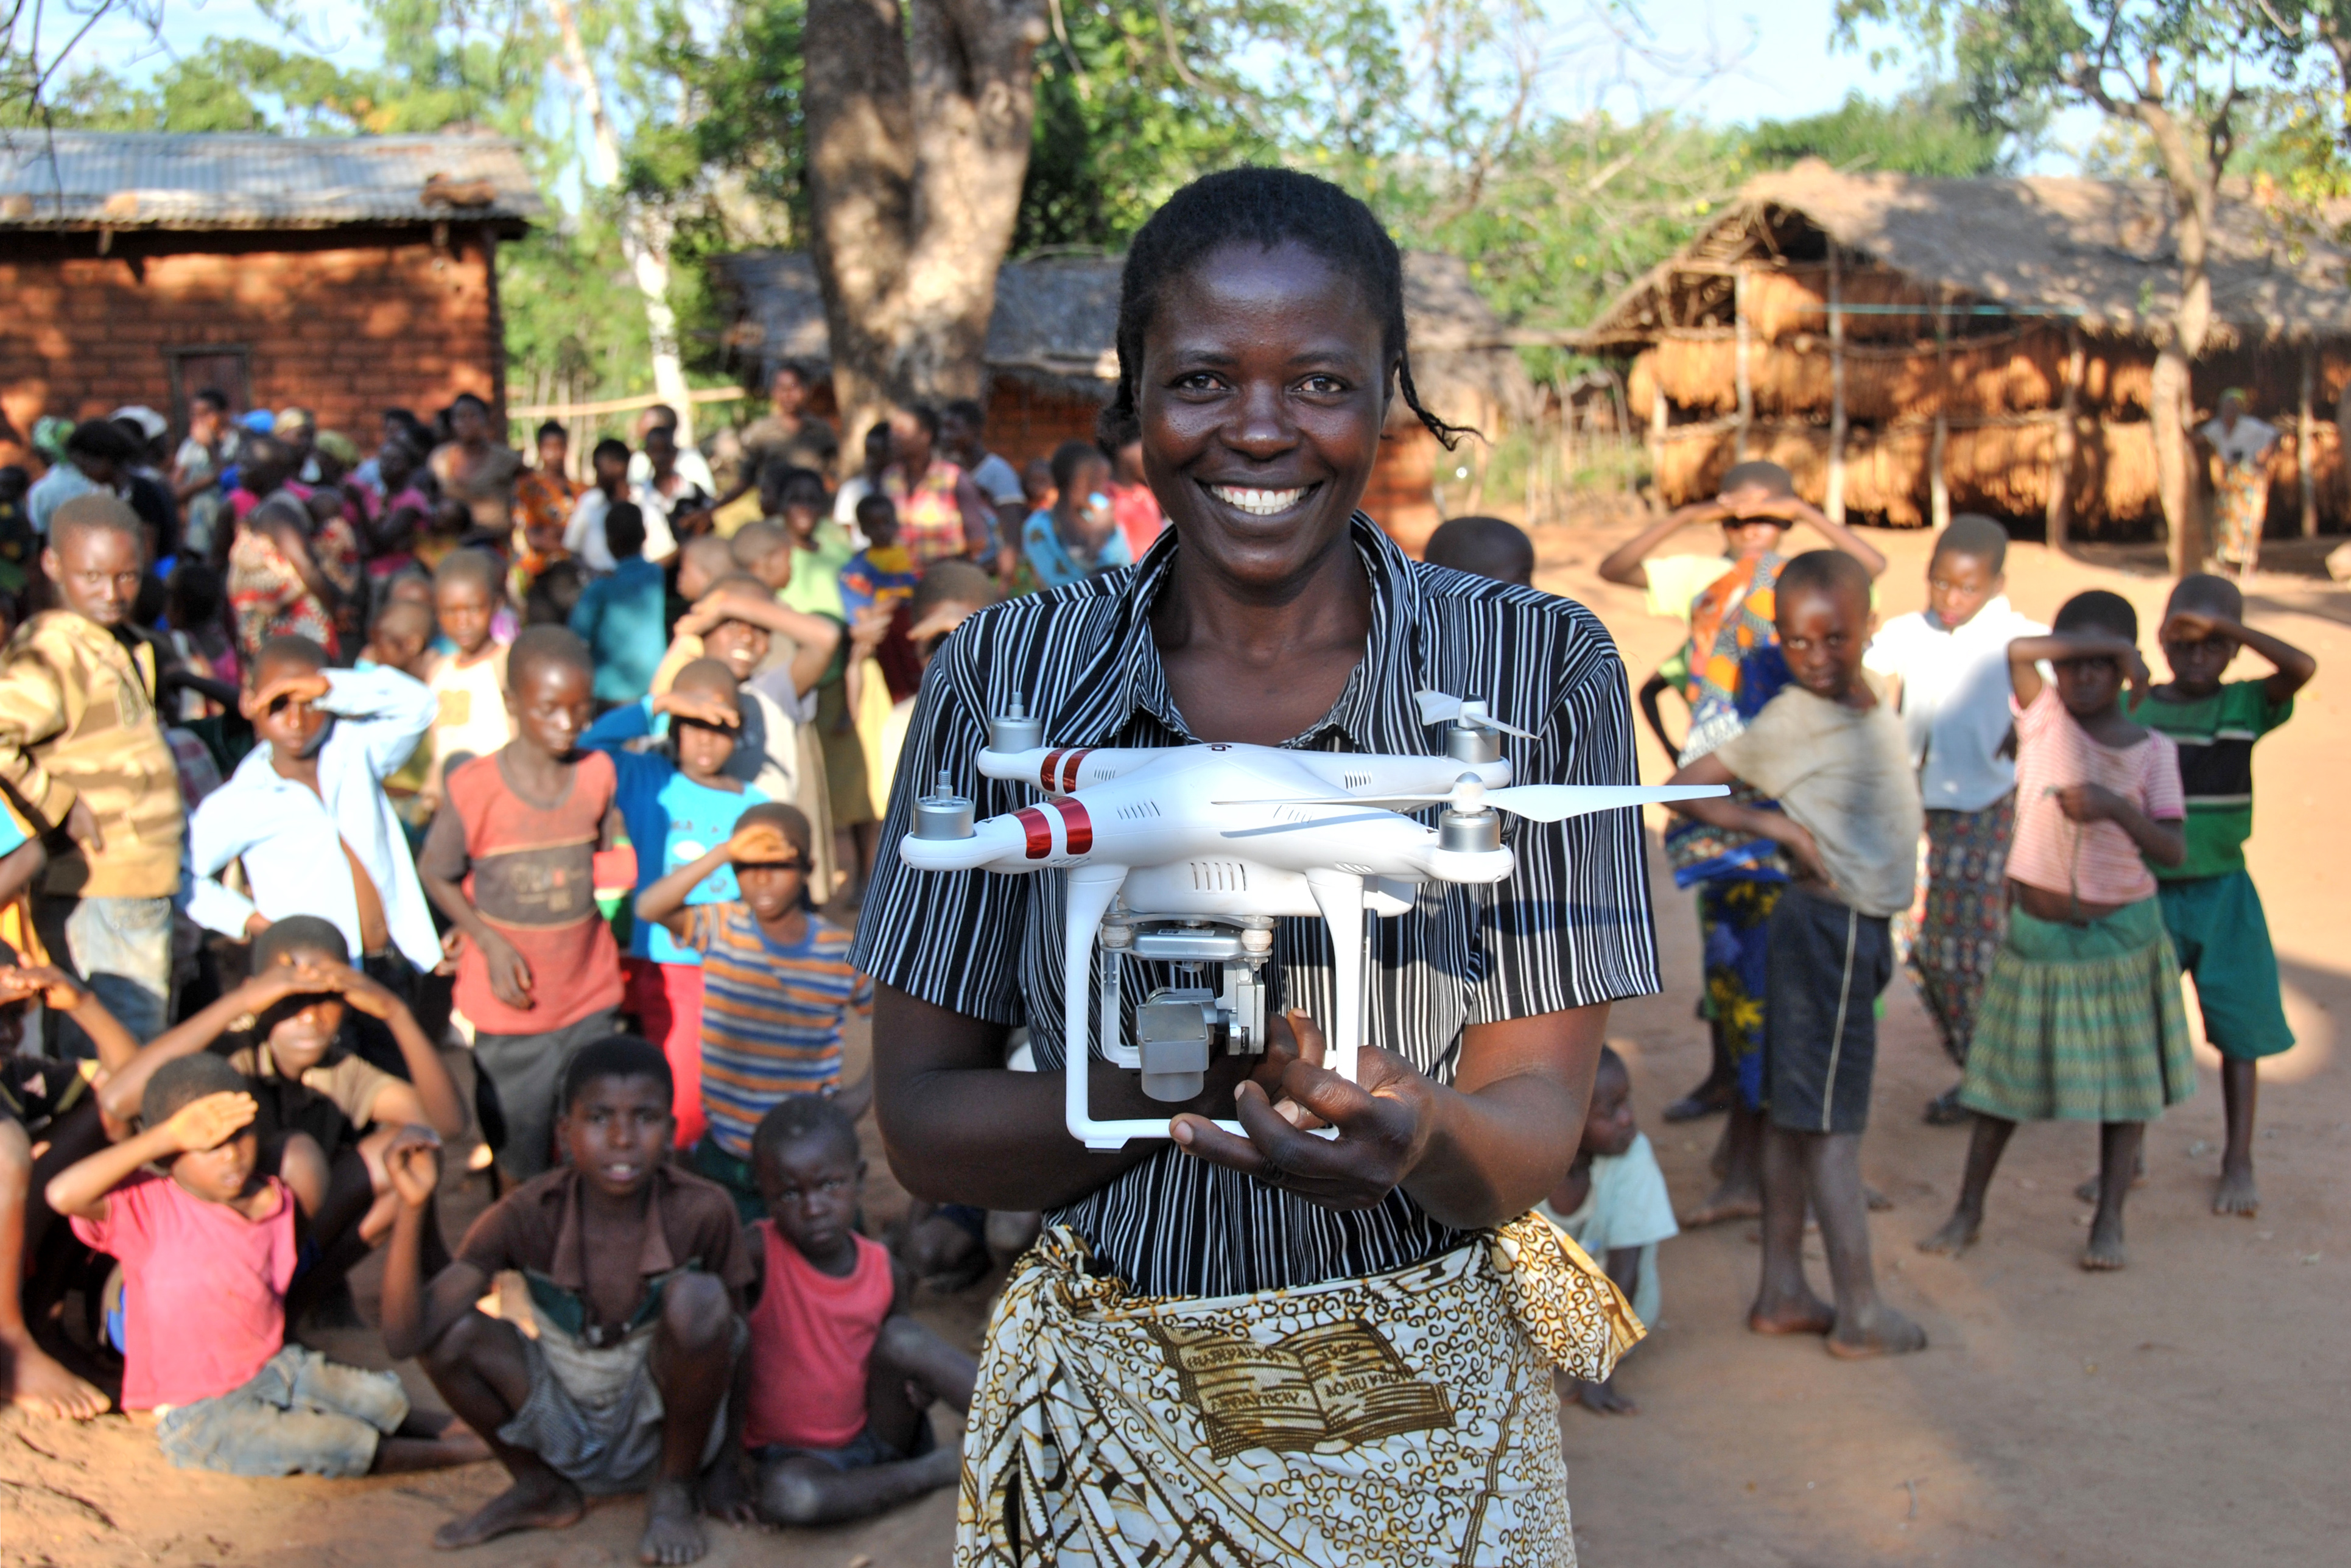 Resident Rhoda Nkhambule holds a drone following a public demonstration of the technology to residents in Thipa vllage, Kasungu District, Malawi, Thursday 29 June 2017.